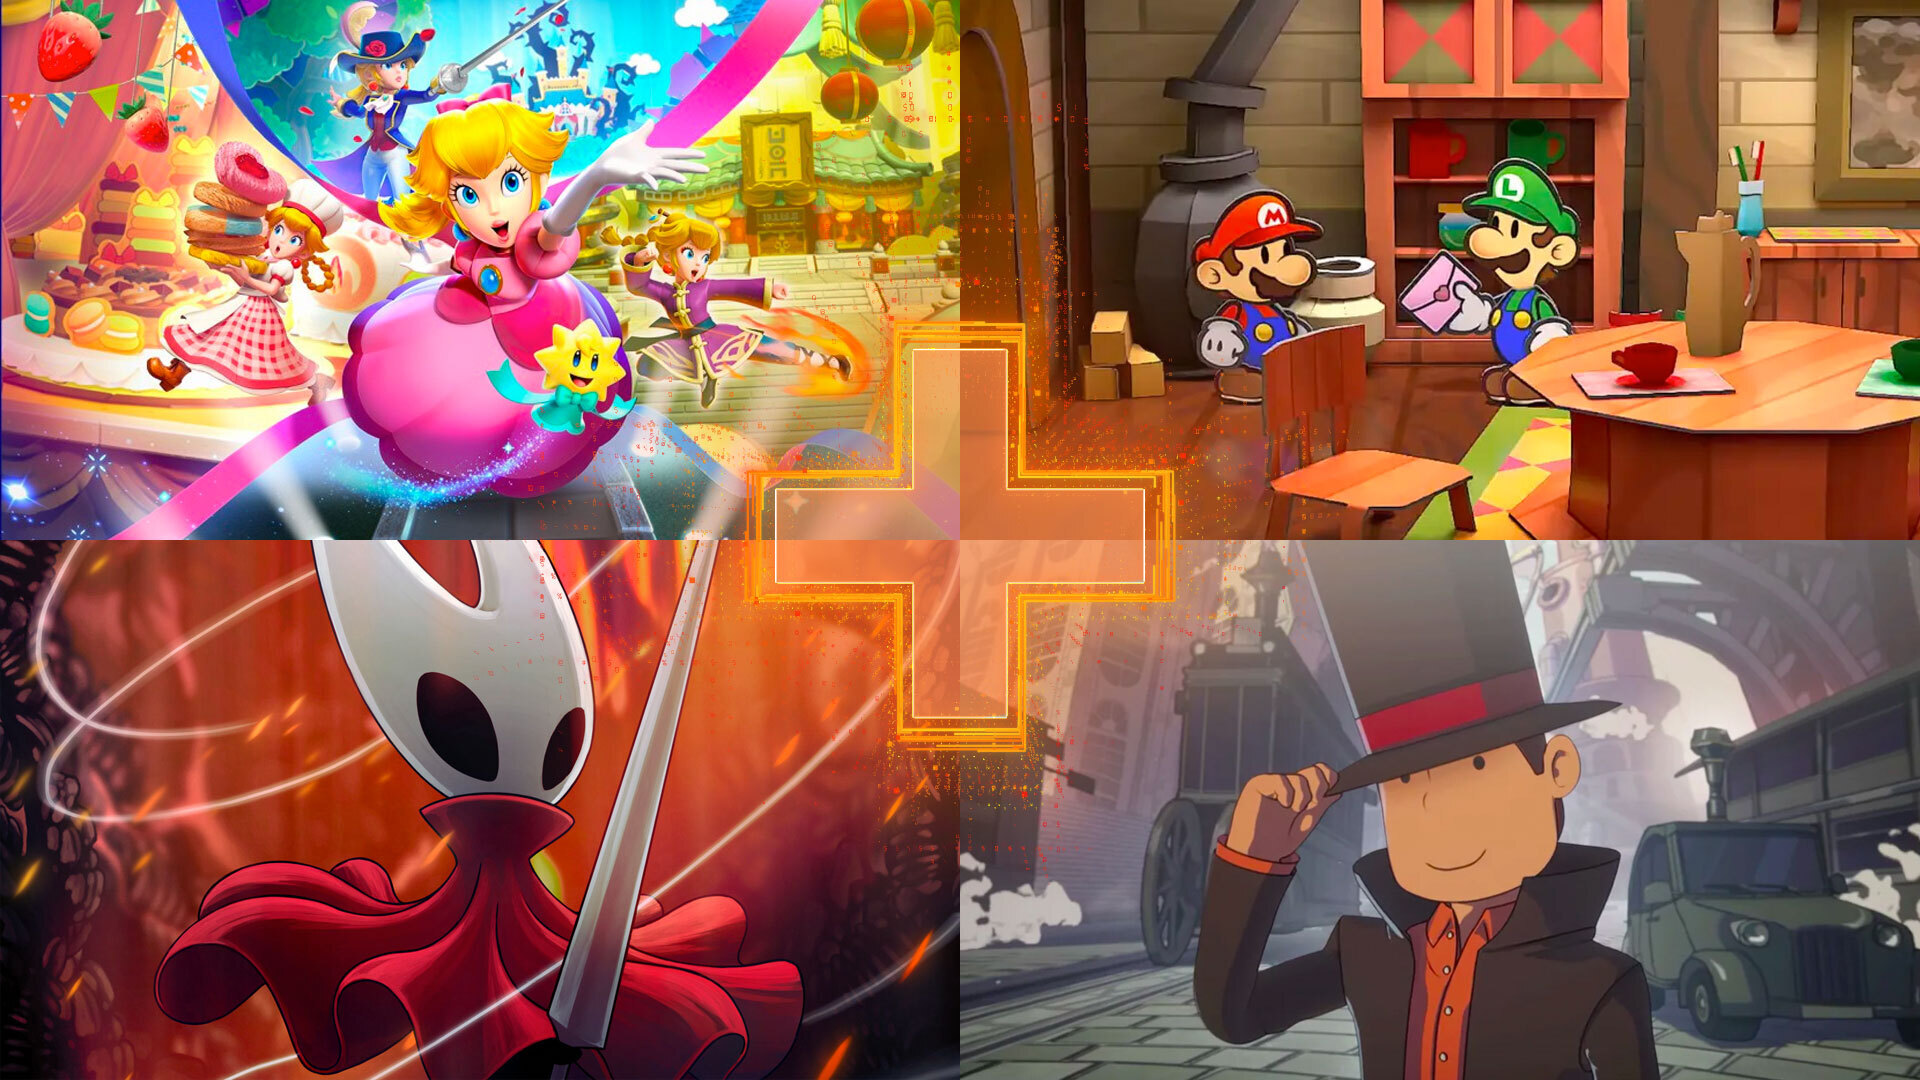 Upcoming Switch games for 2023 (and beyond)